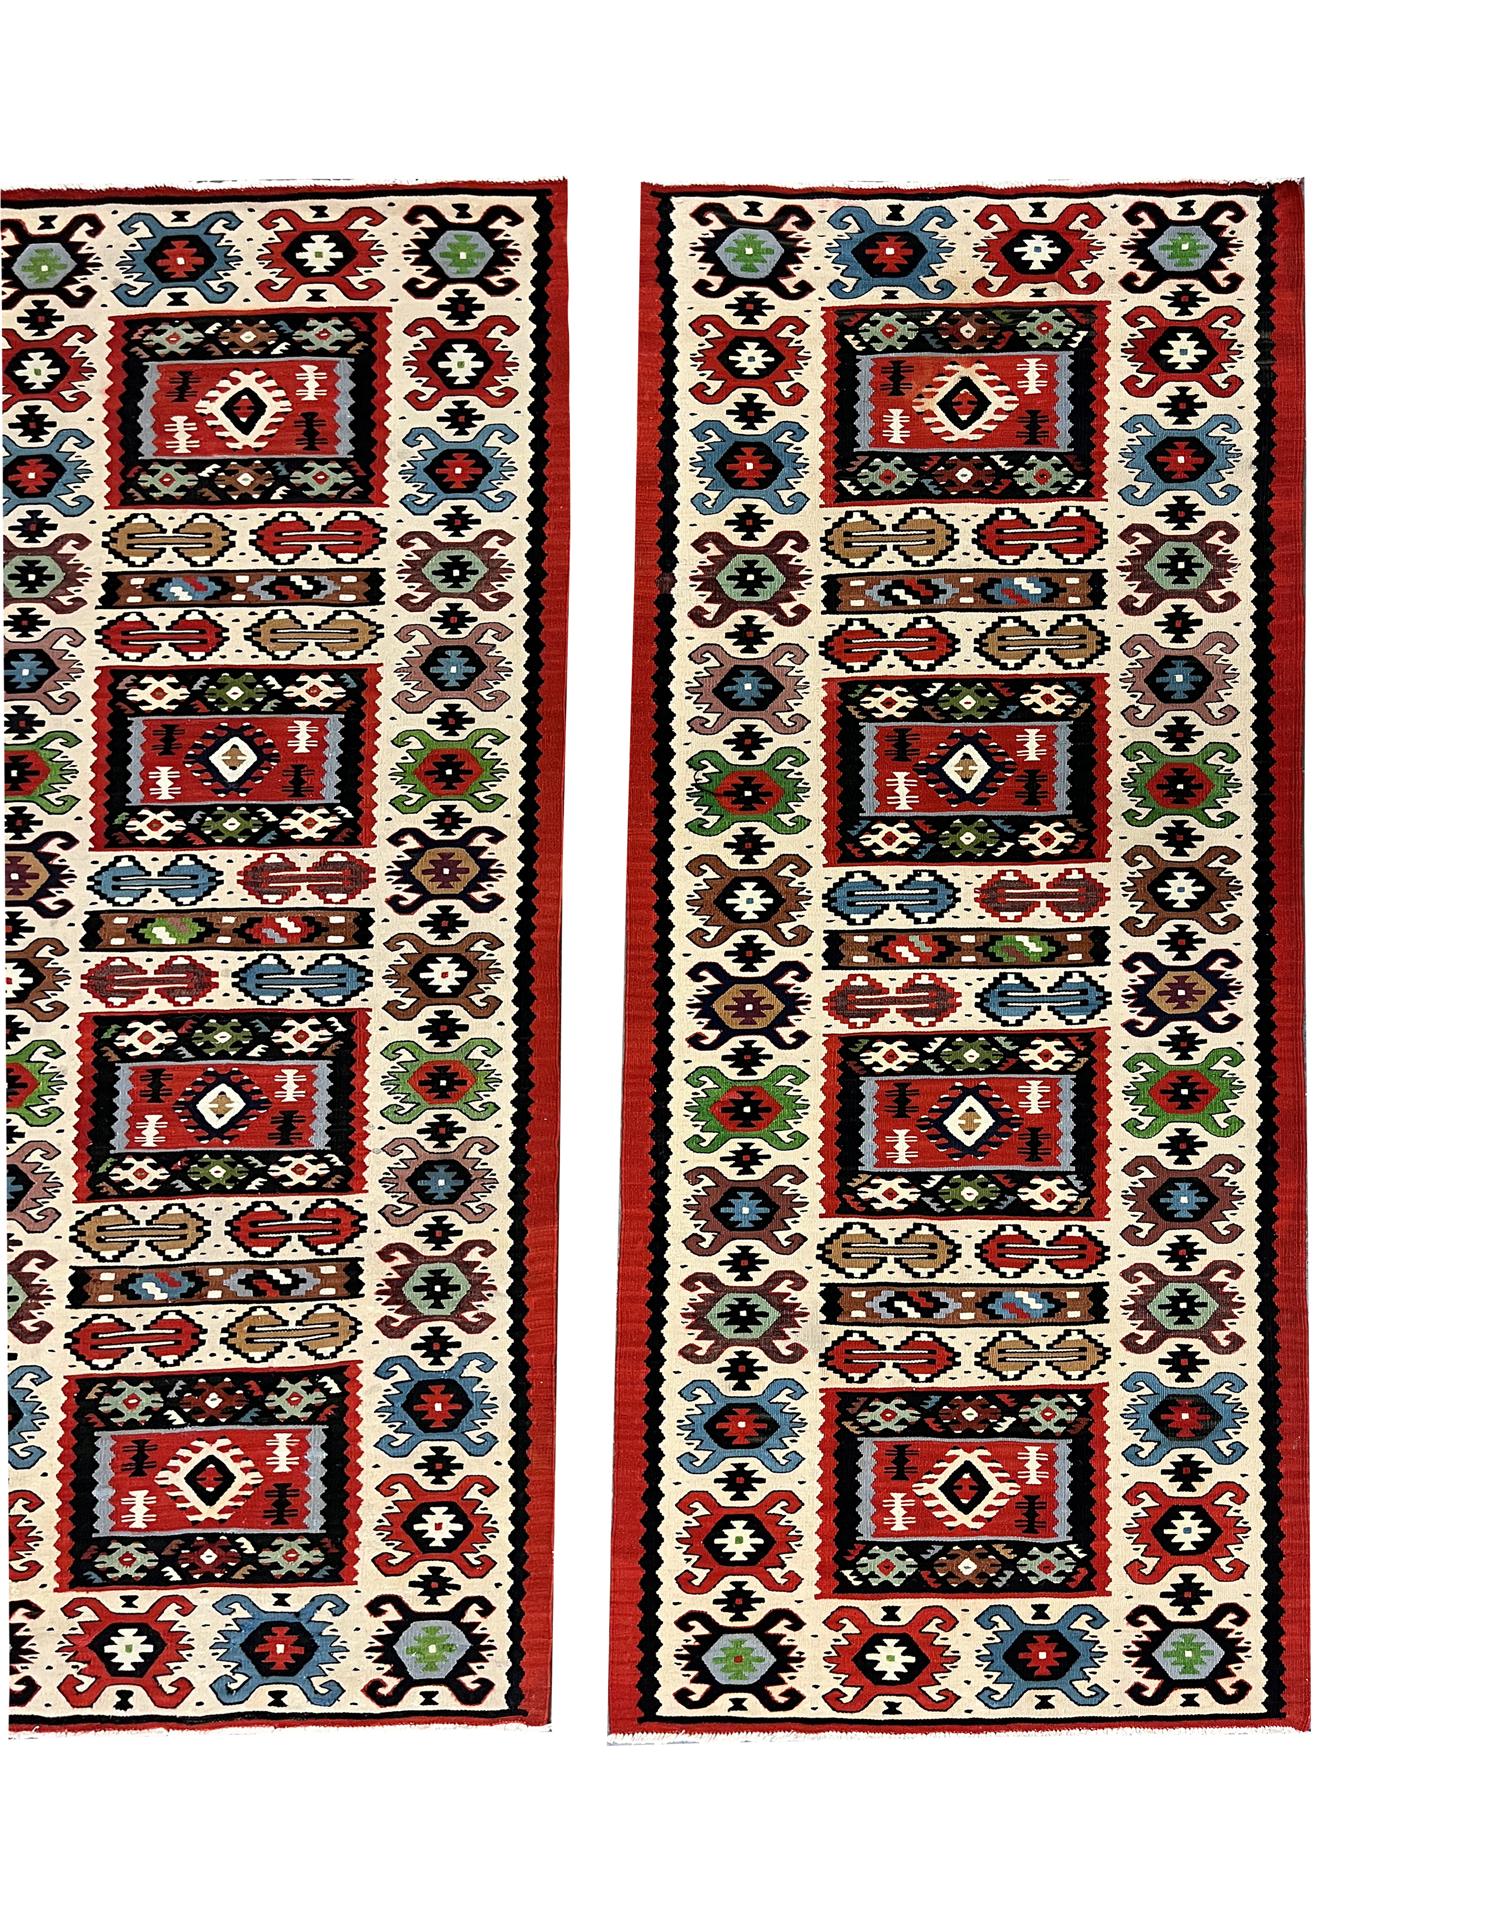 Hand-Woven Pair of Kilims Traditional Handmade Red Wool Turkish Runner Rugs For Sale